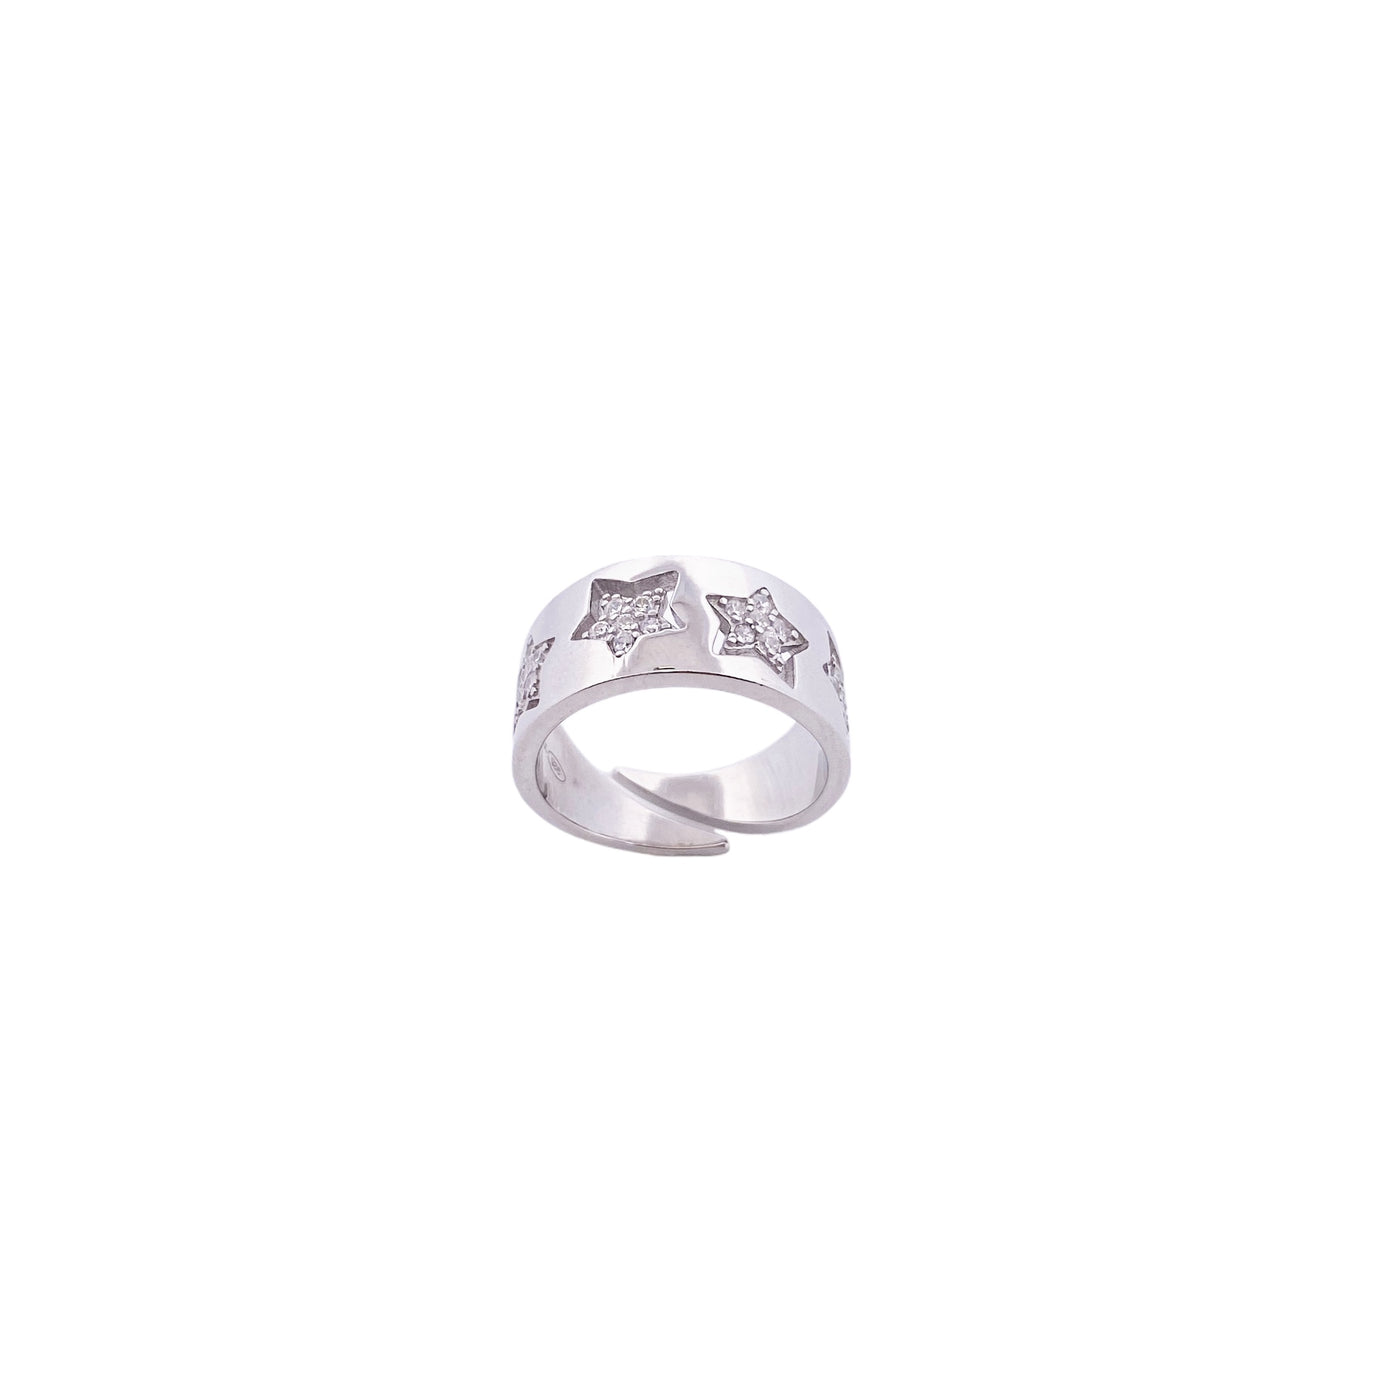 SILVER RING WITH ZIRCONIA STARS